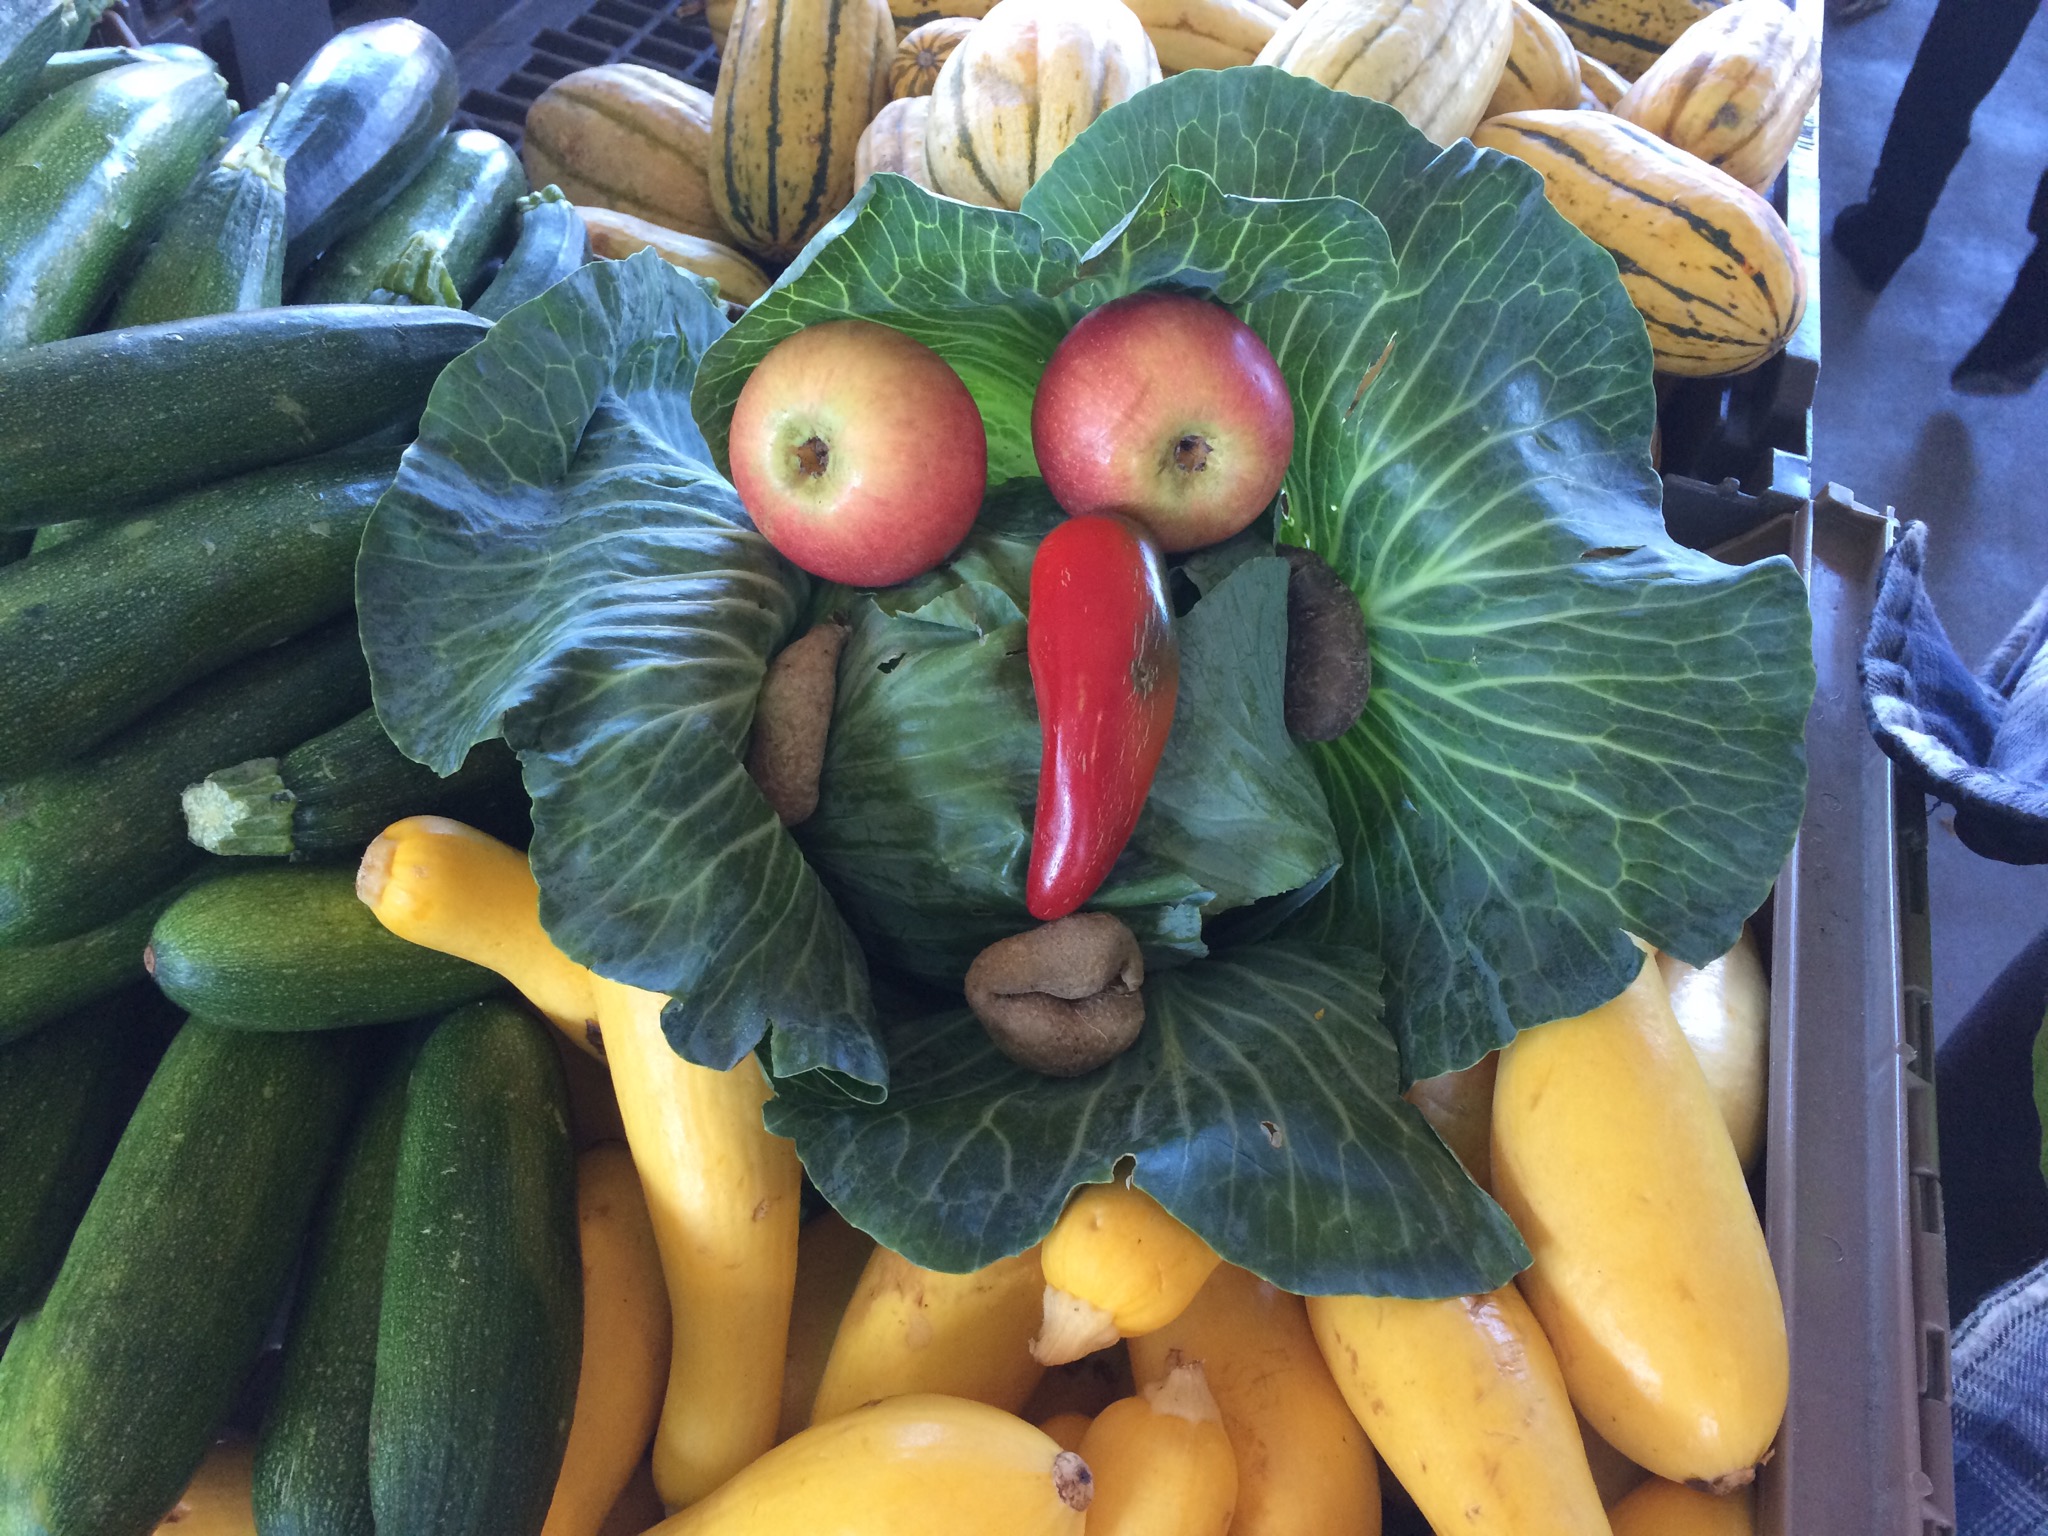 One of our farmers having some fun with produce.